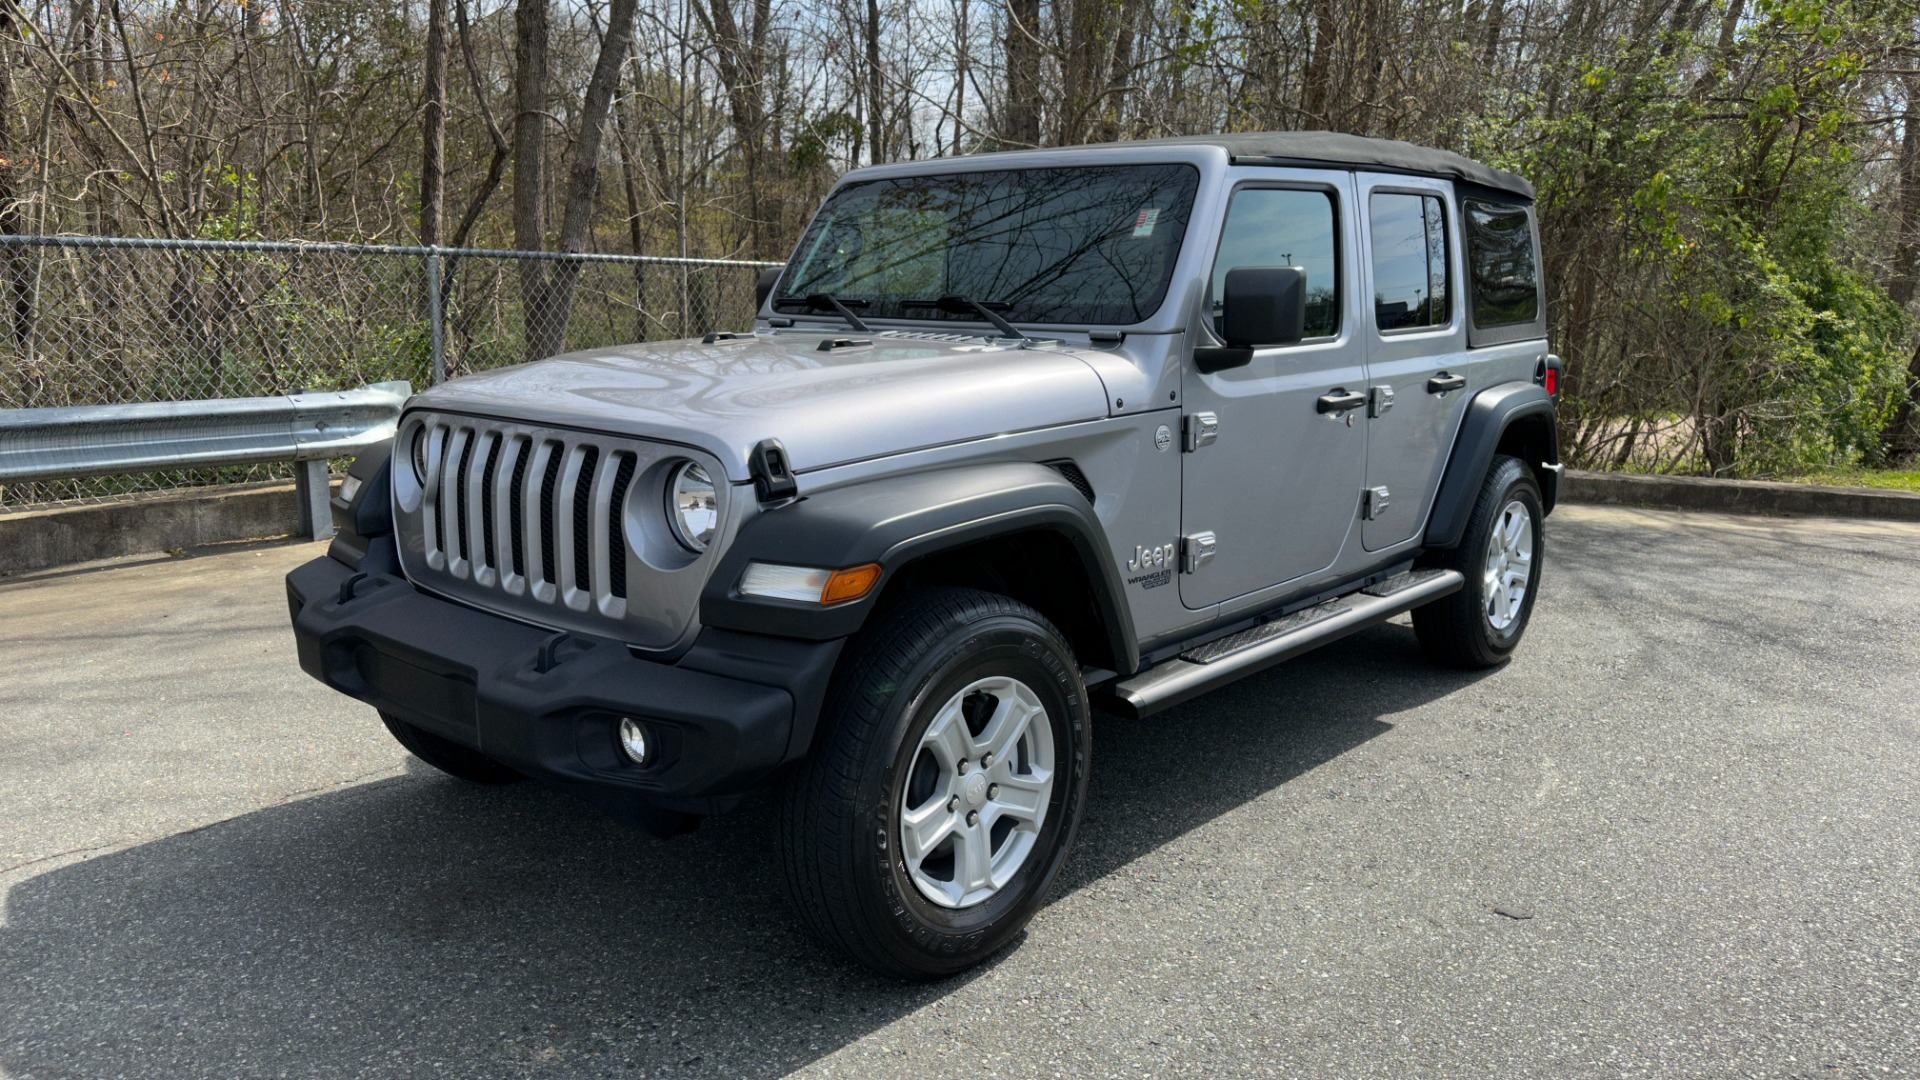 Used 2018 Jeep Wrangler Unlimited Sport S / SOFT TOP / CLOTH SEATS / SIDE STEPS / TRAILERING PACKAGE for sale $33,500 at Formula Imports in Charlotte NC 28227 2